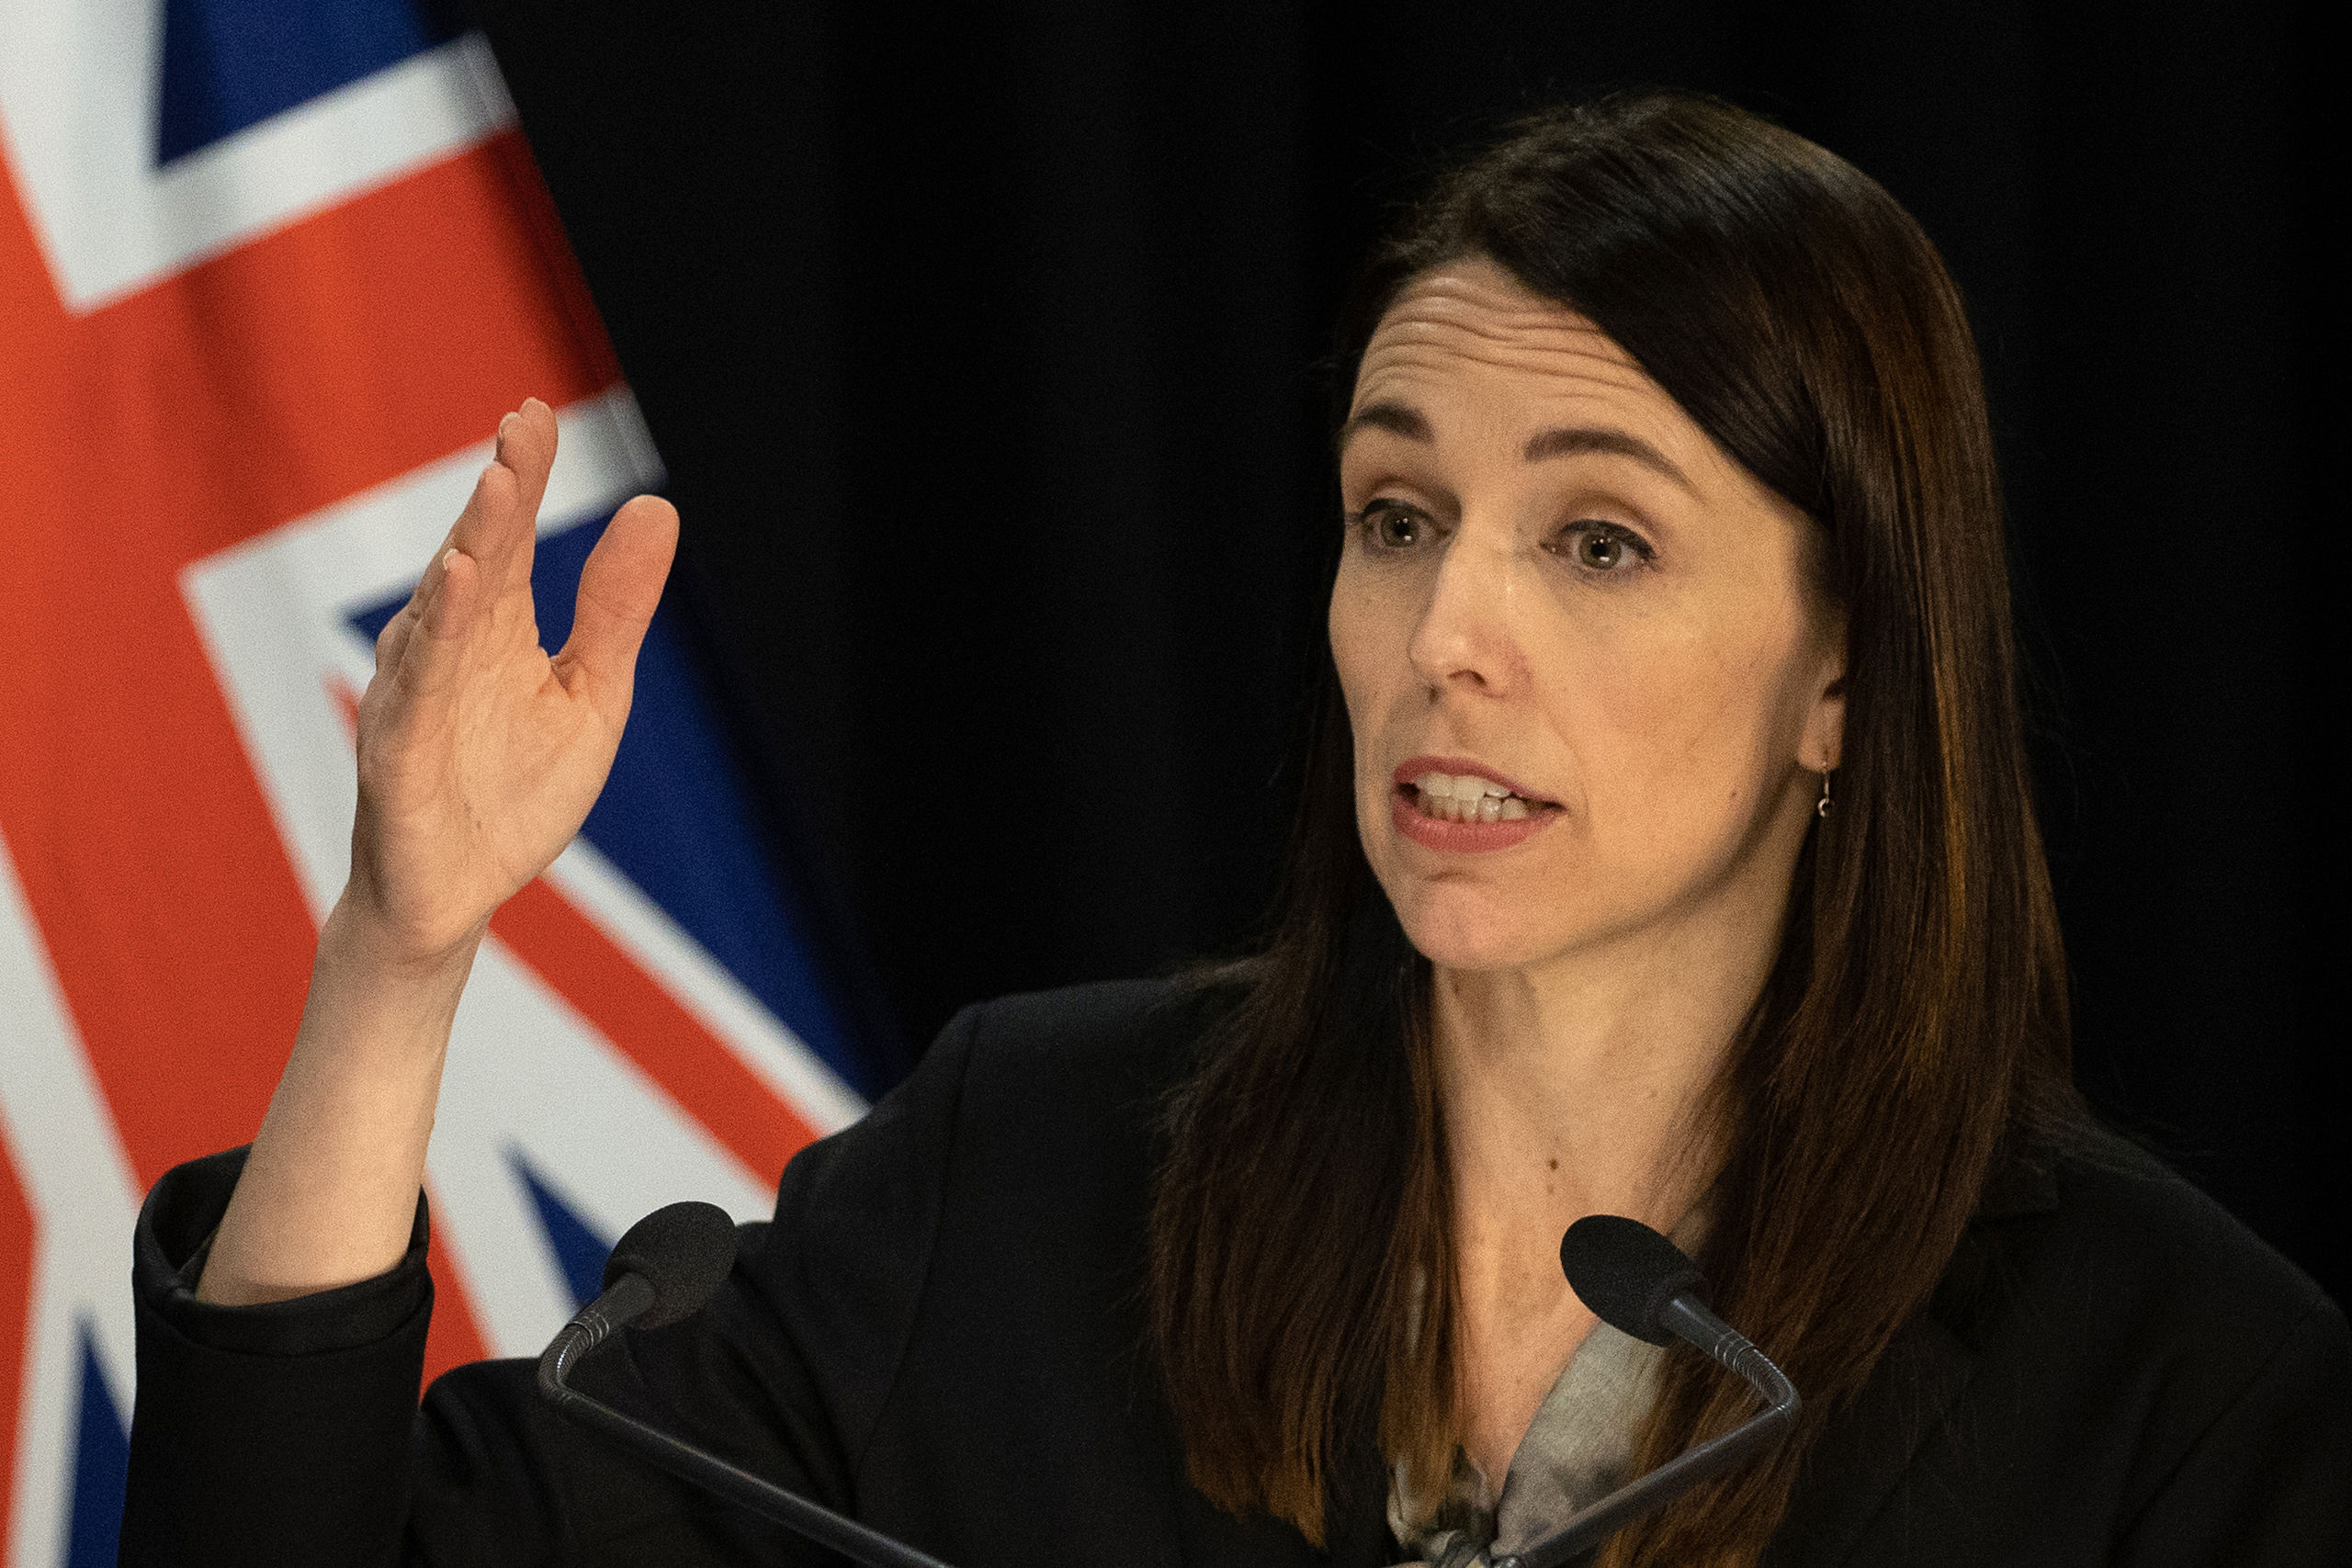 2020-08-12 01:23:29 New Zealand's Prime Minister Jacinda Ardern speaks to the media regarding the latest case of COVID-19 coronavirus infections, breaking a 102-day run of no local transmissions, at the parliament in Auckland on August 12, 2020. New Zealand's dream run of 102 days without locally transmitted coronavirus ended on August 11, prompting a stay-at-home lockdown order for the country's largest city. Marty MELVILLE / AFP